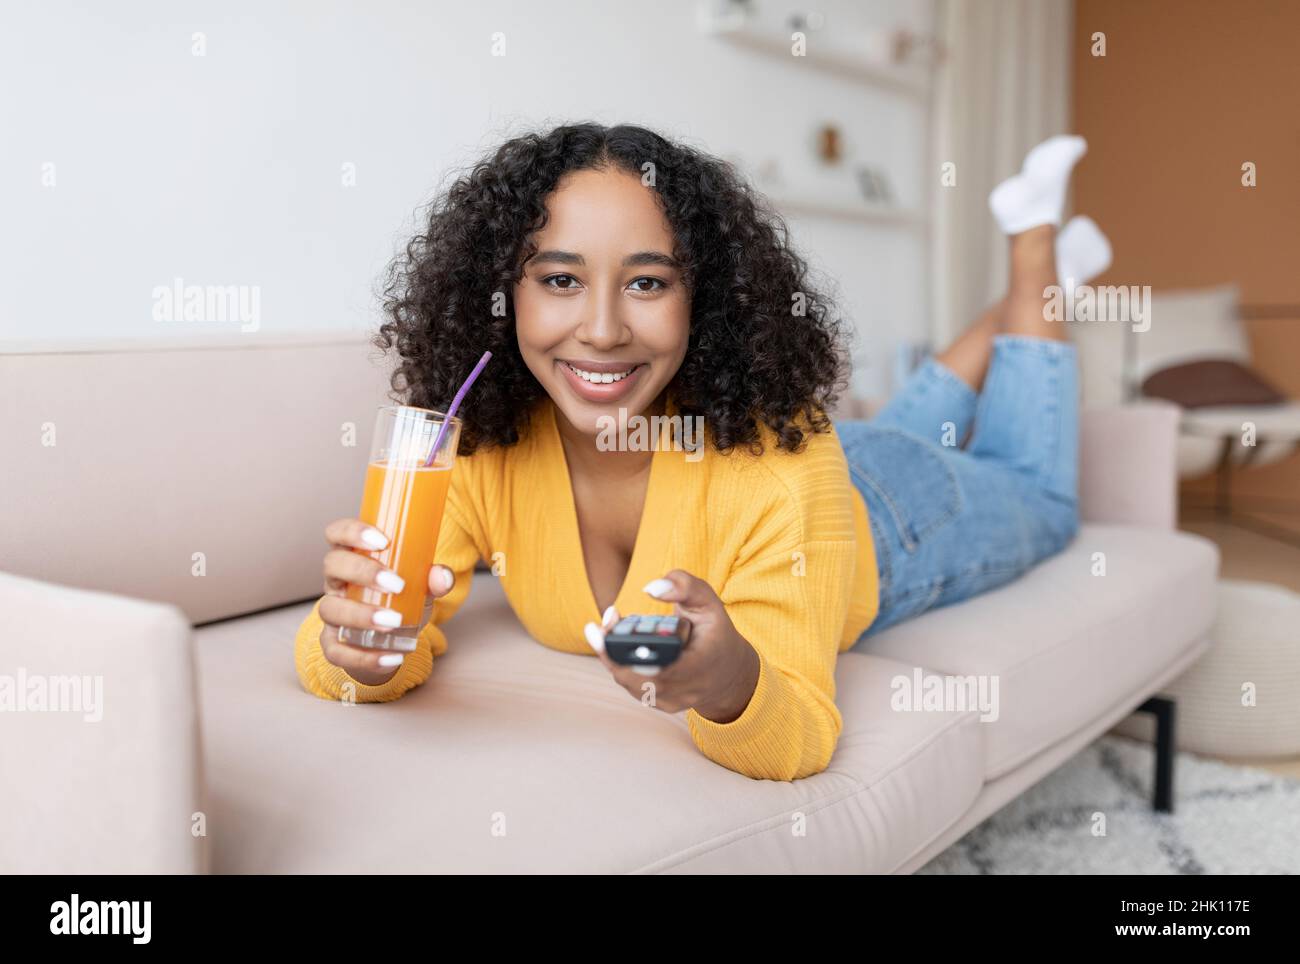 Happy young black lady lying on couch with TV remote control and glass of orange juice, switching channels at home Stock Photo